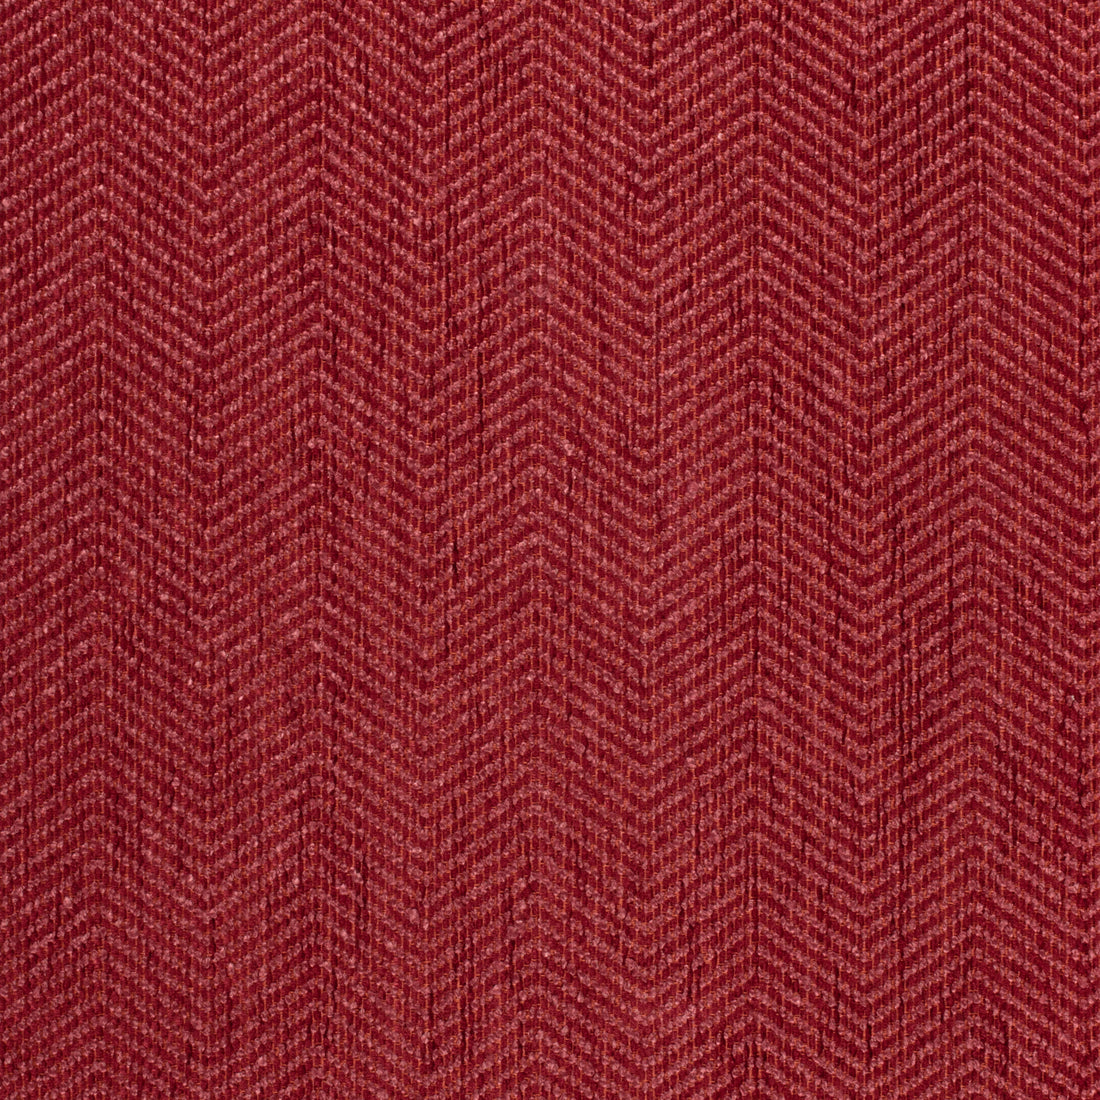 Dalton Herringbone fabric in berry color - pattern number W80627 - by Thibaut in the Pinnacle collection